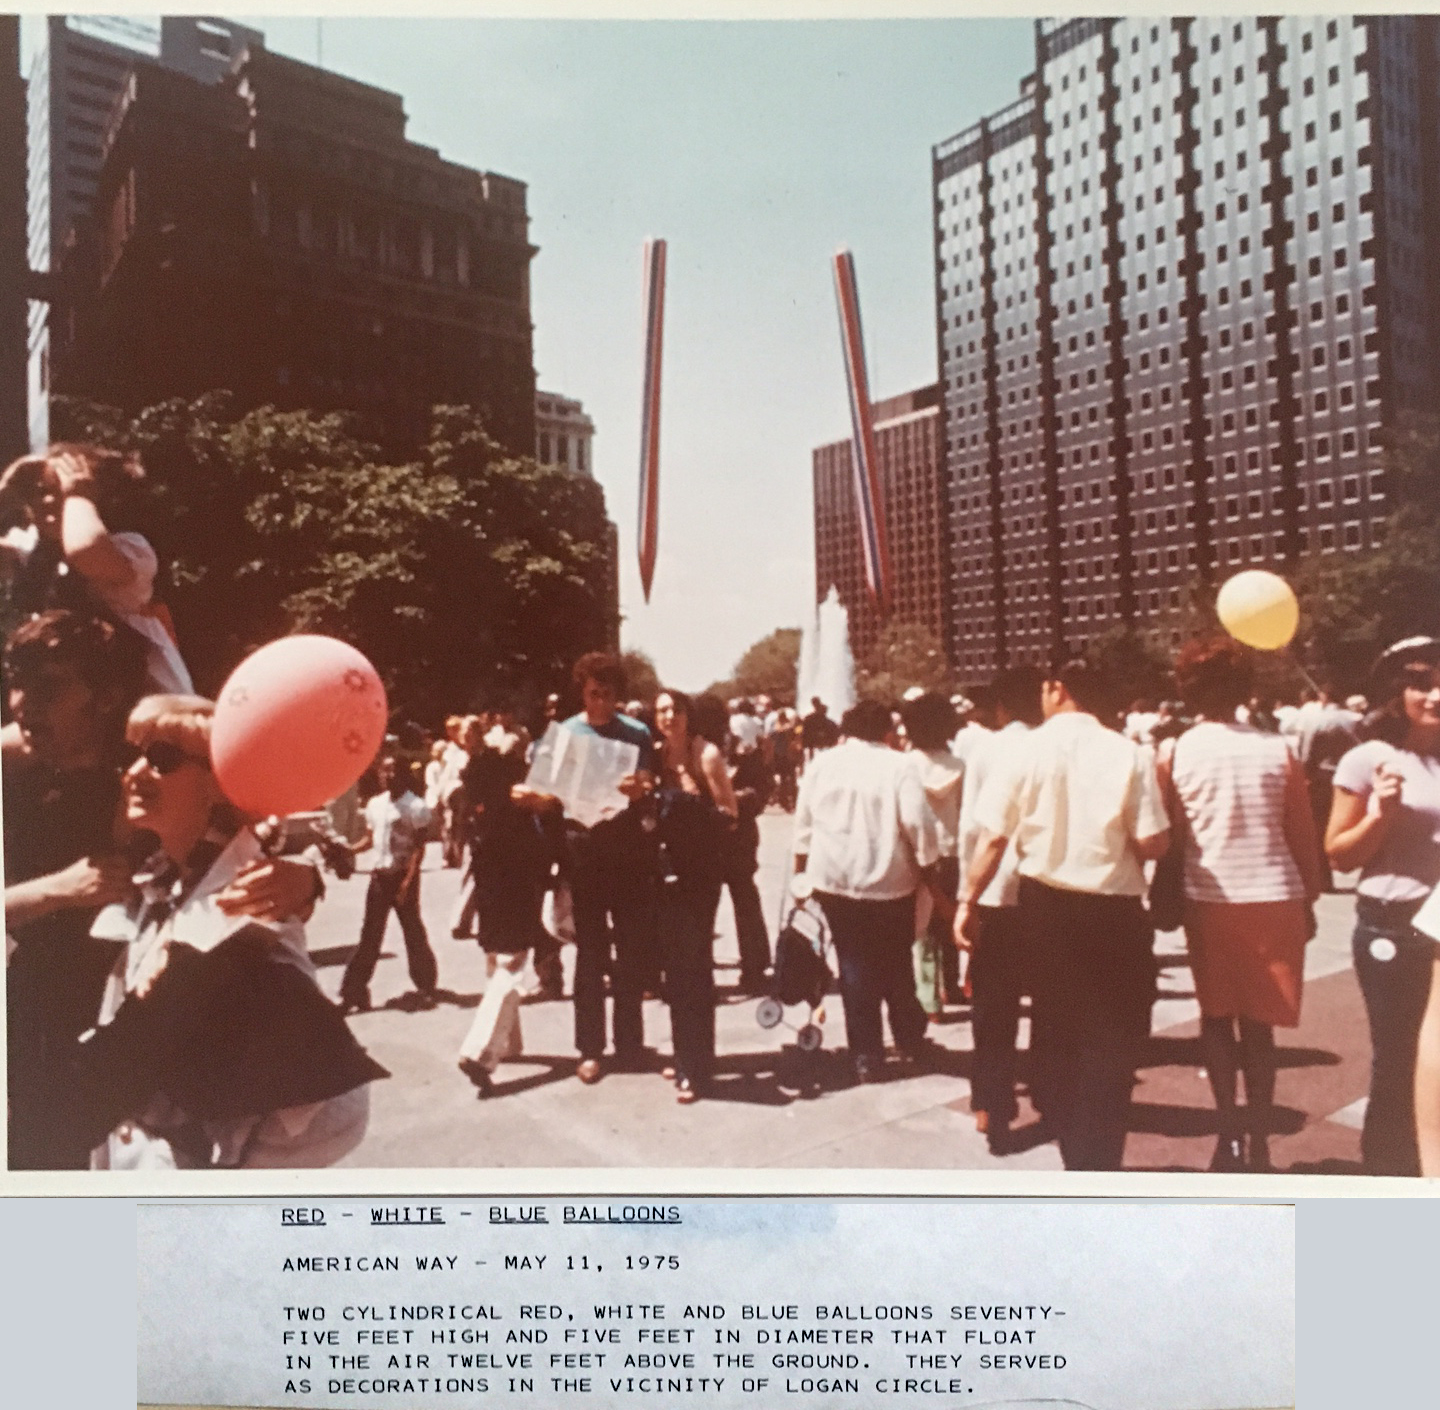 THE_AMERICAN_WAY_1975 Balloons